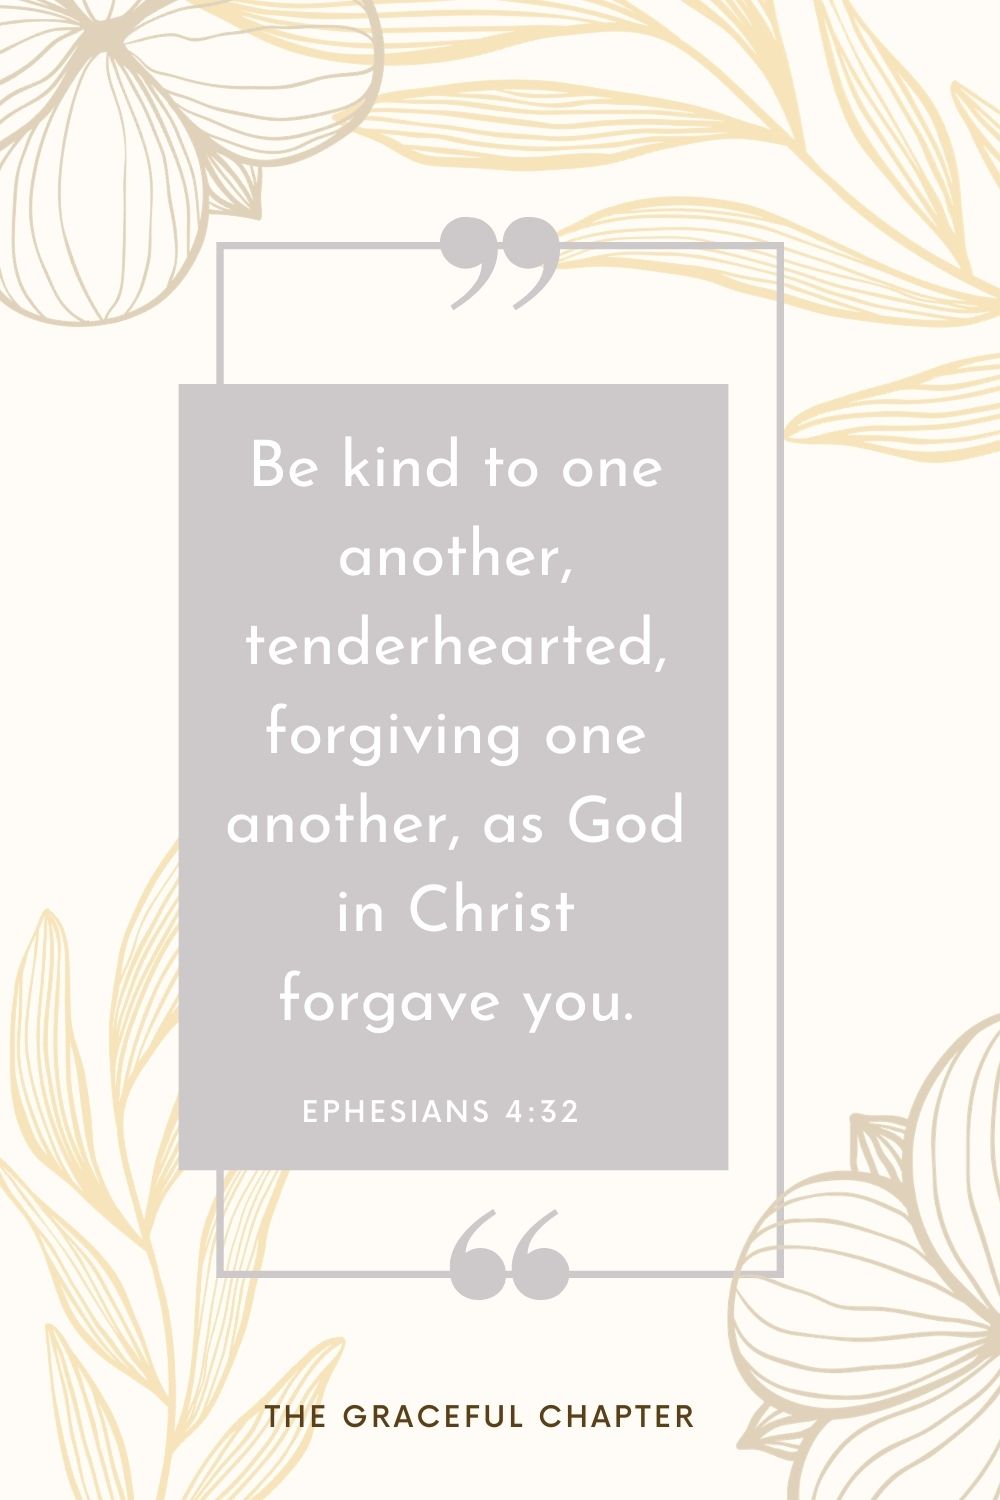 Be kind to one another, tenderhearted, forgiving one another, as God in Christ forgave you. Ephesians 4:32